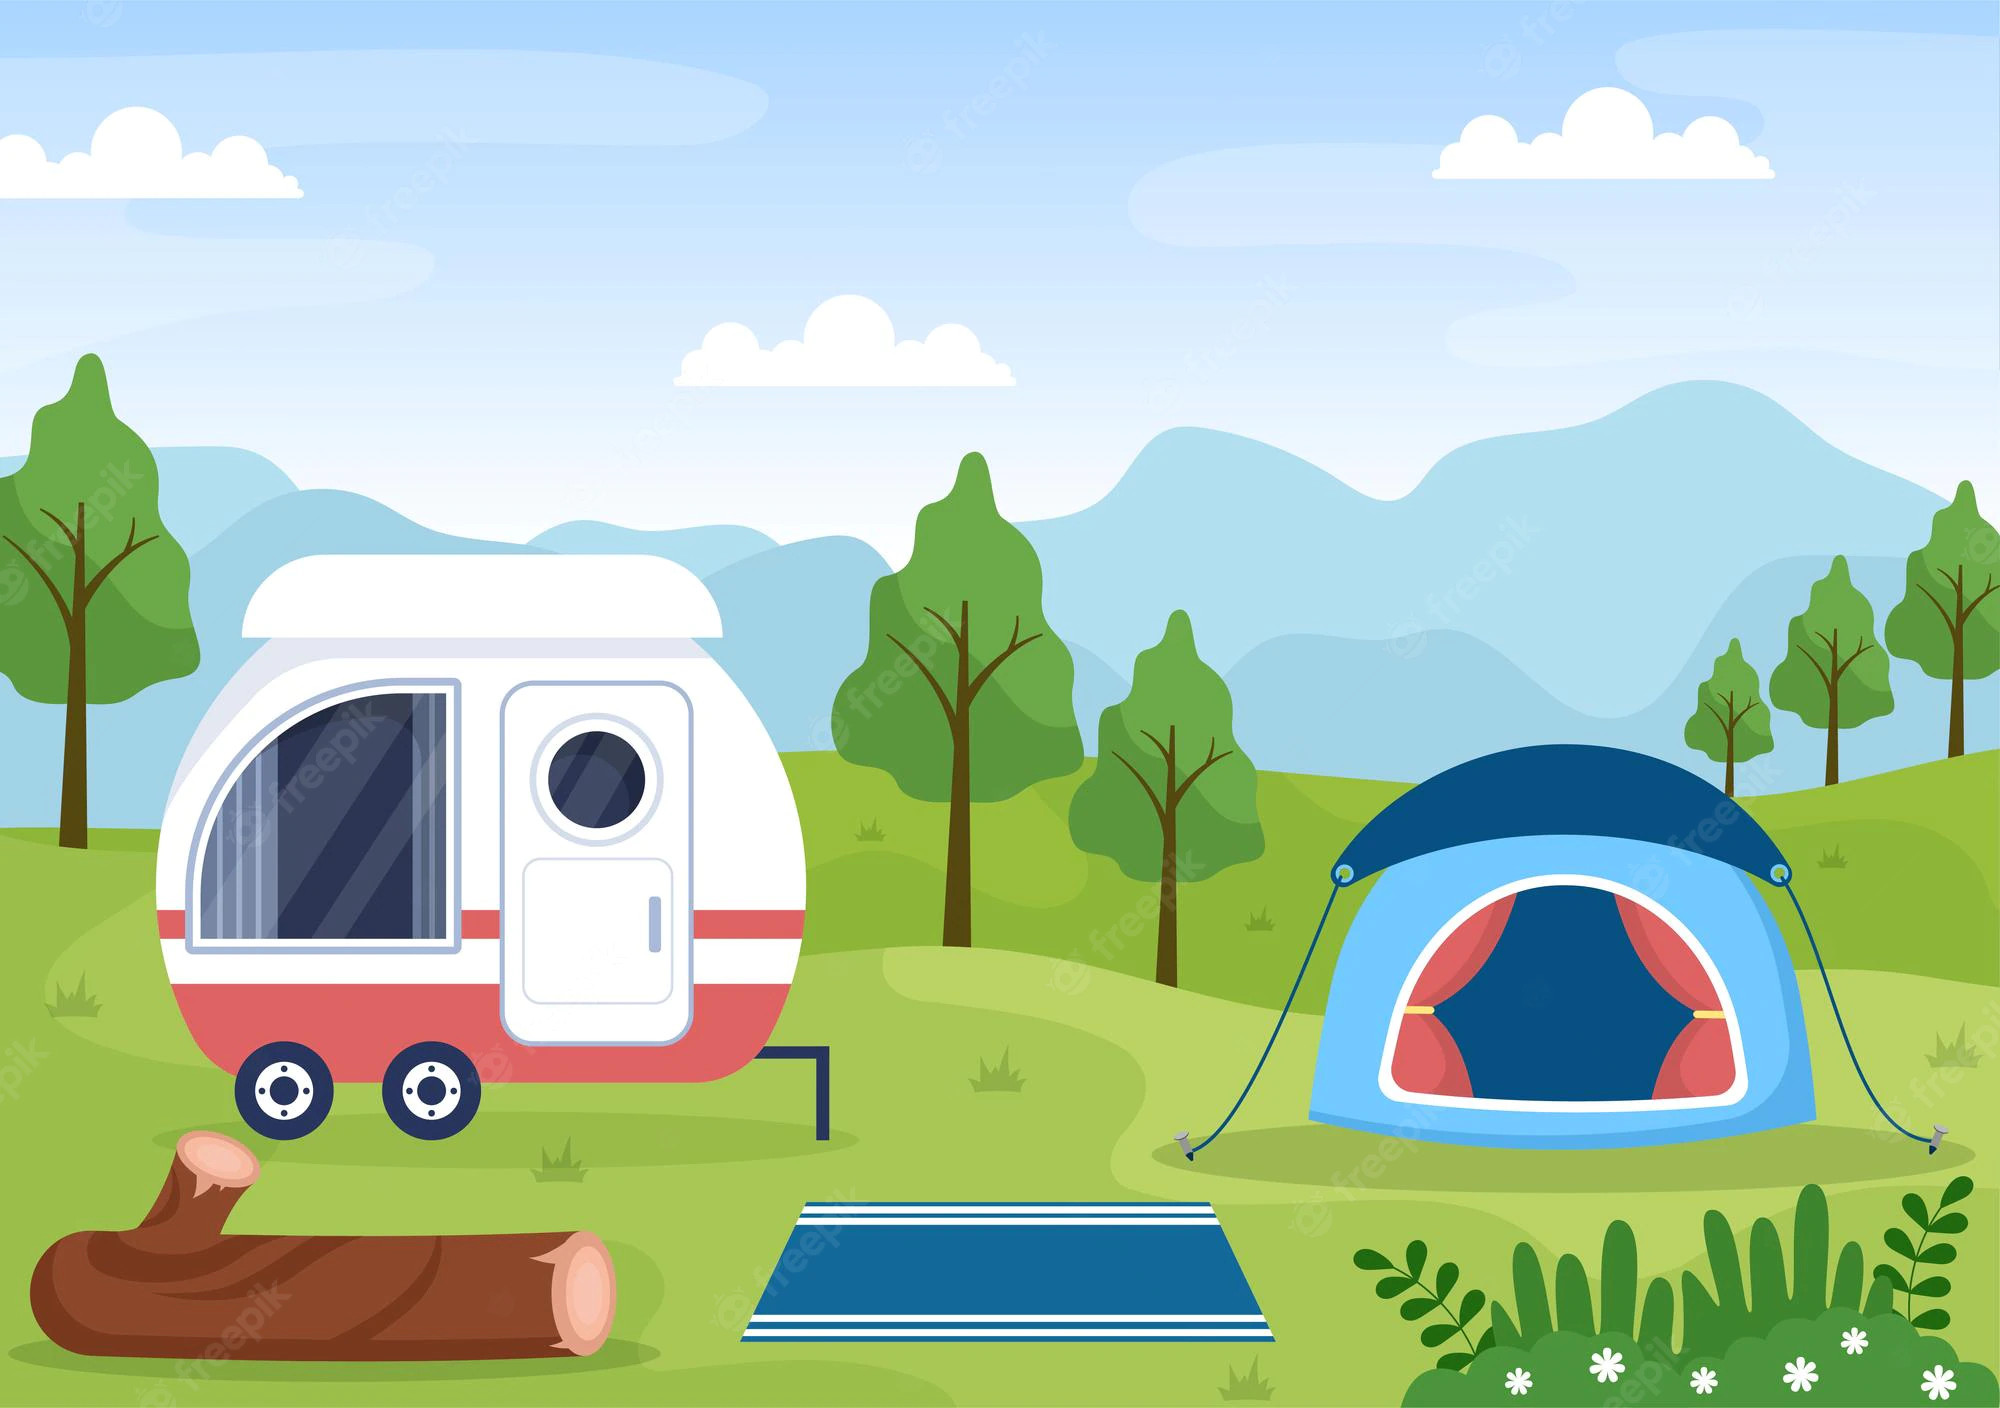 RV vs. Tent Camping - Find Out Which One Works Best for You